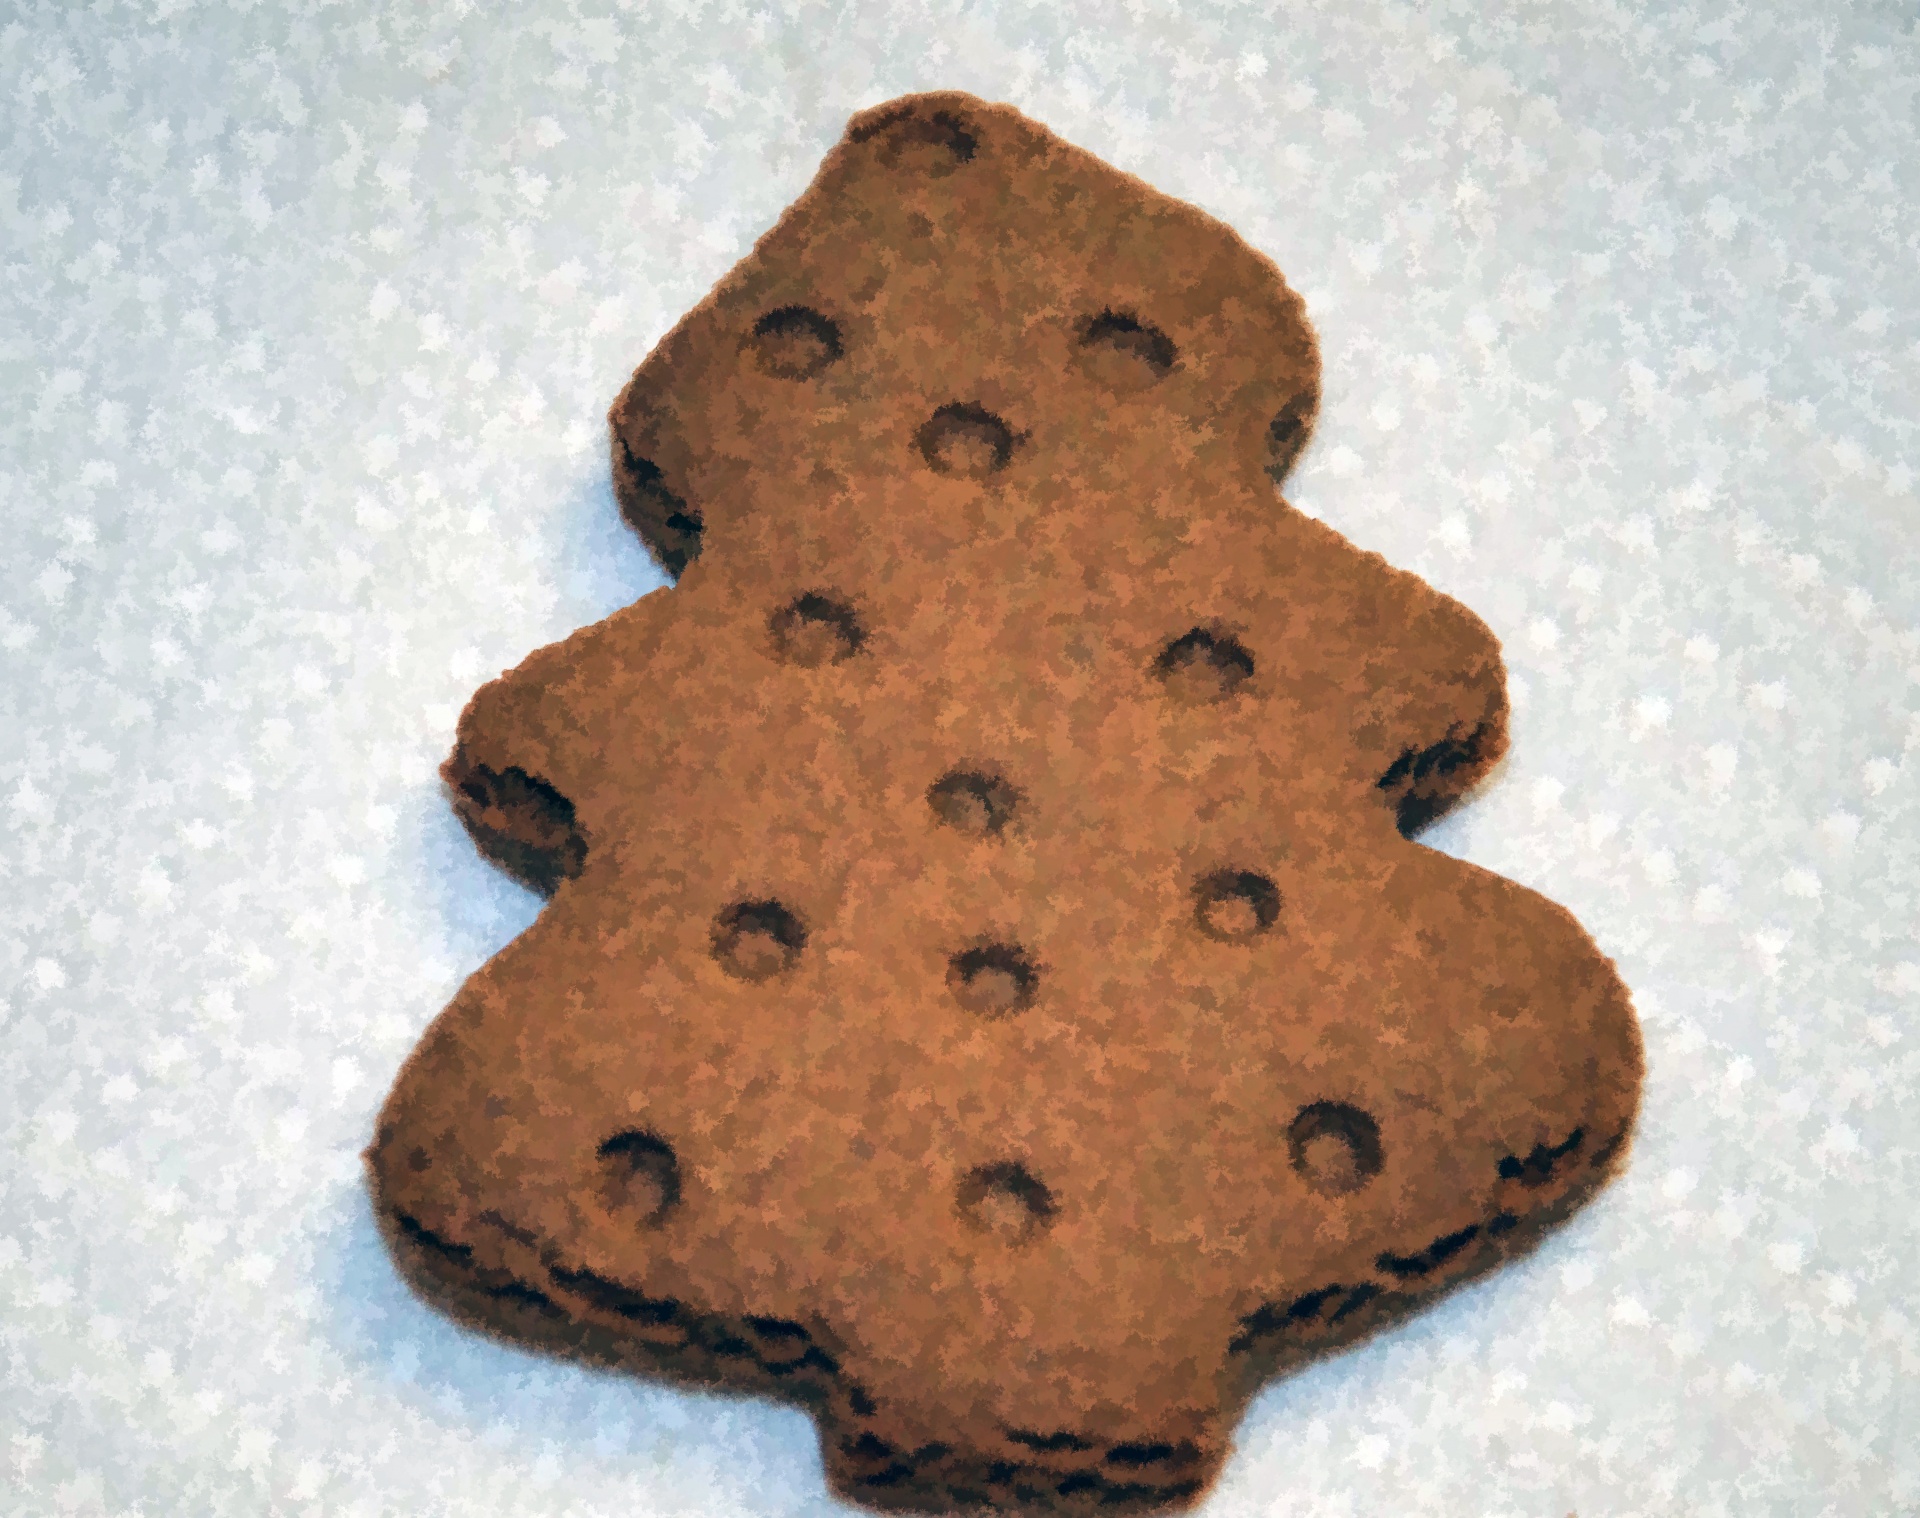 gingerbread-cookie-free-stock-photo-public-domain-pictures